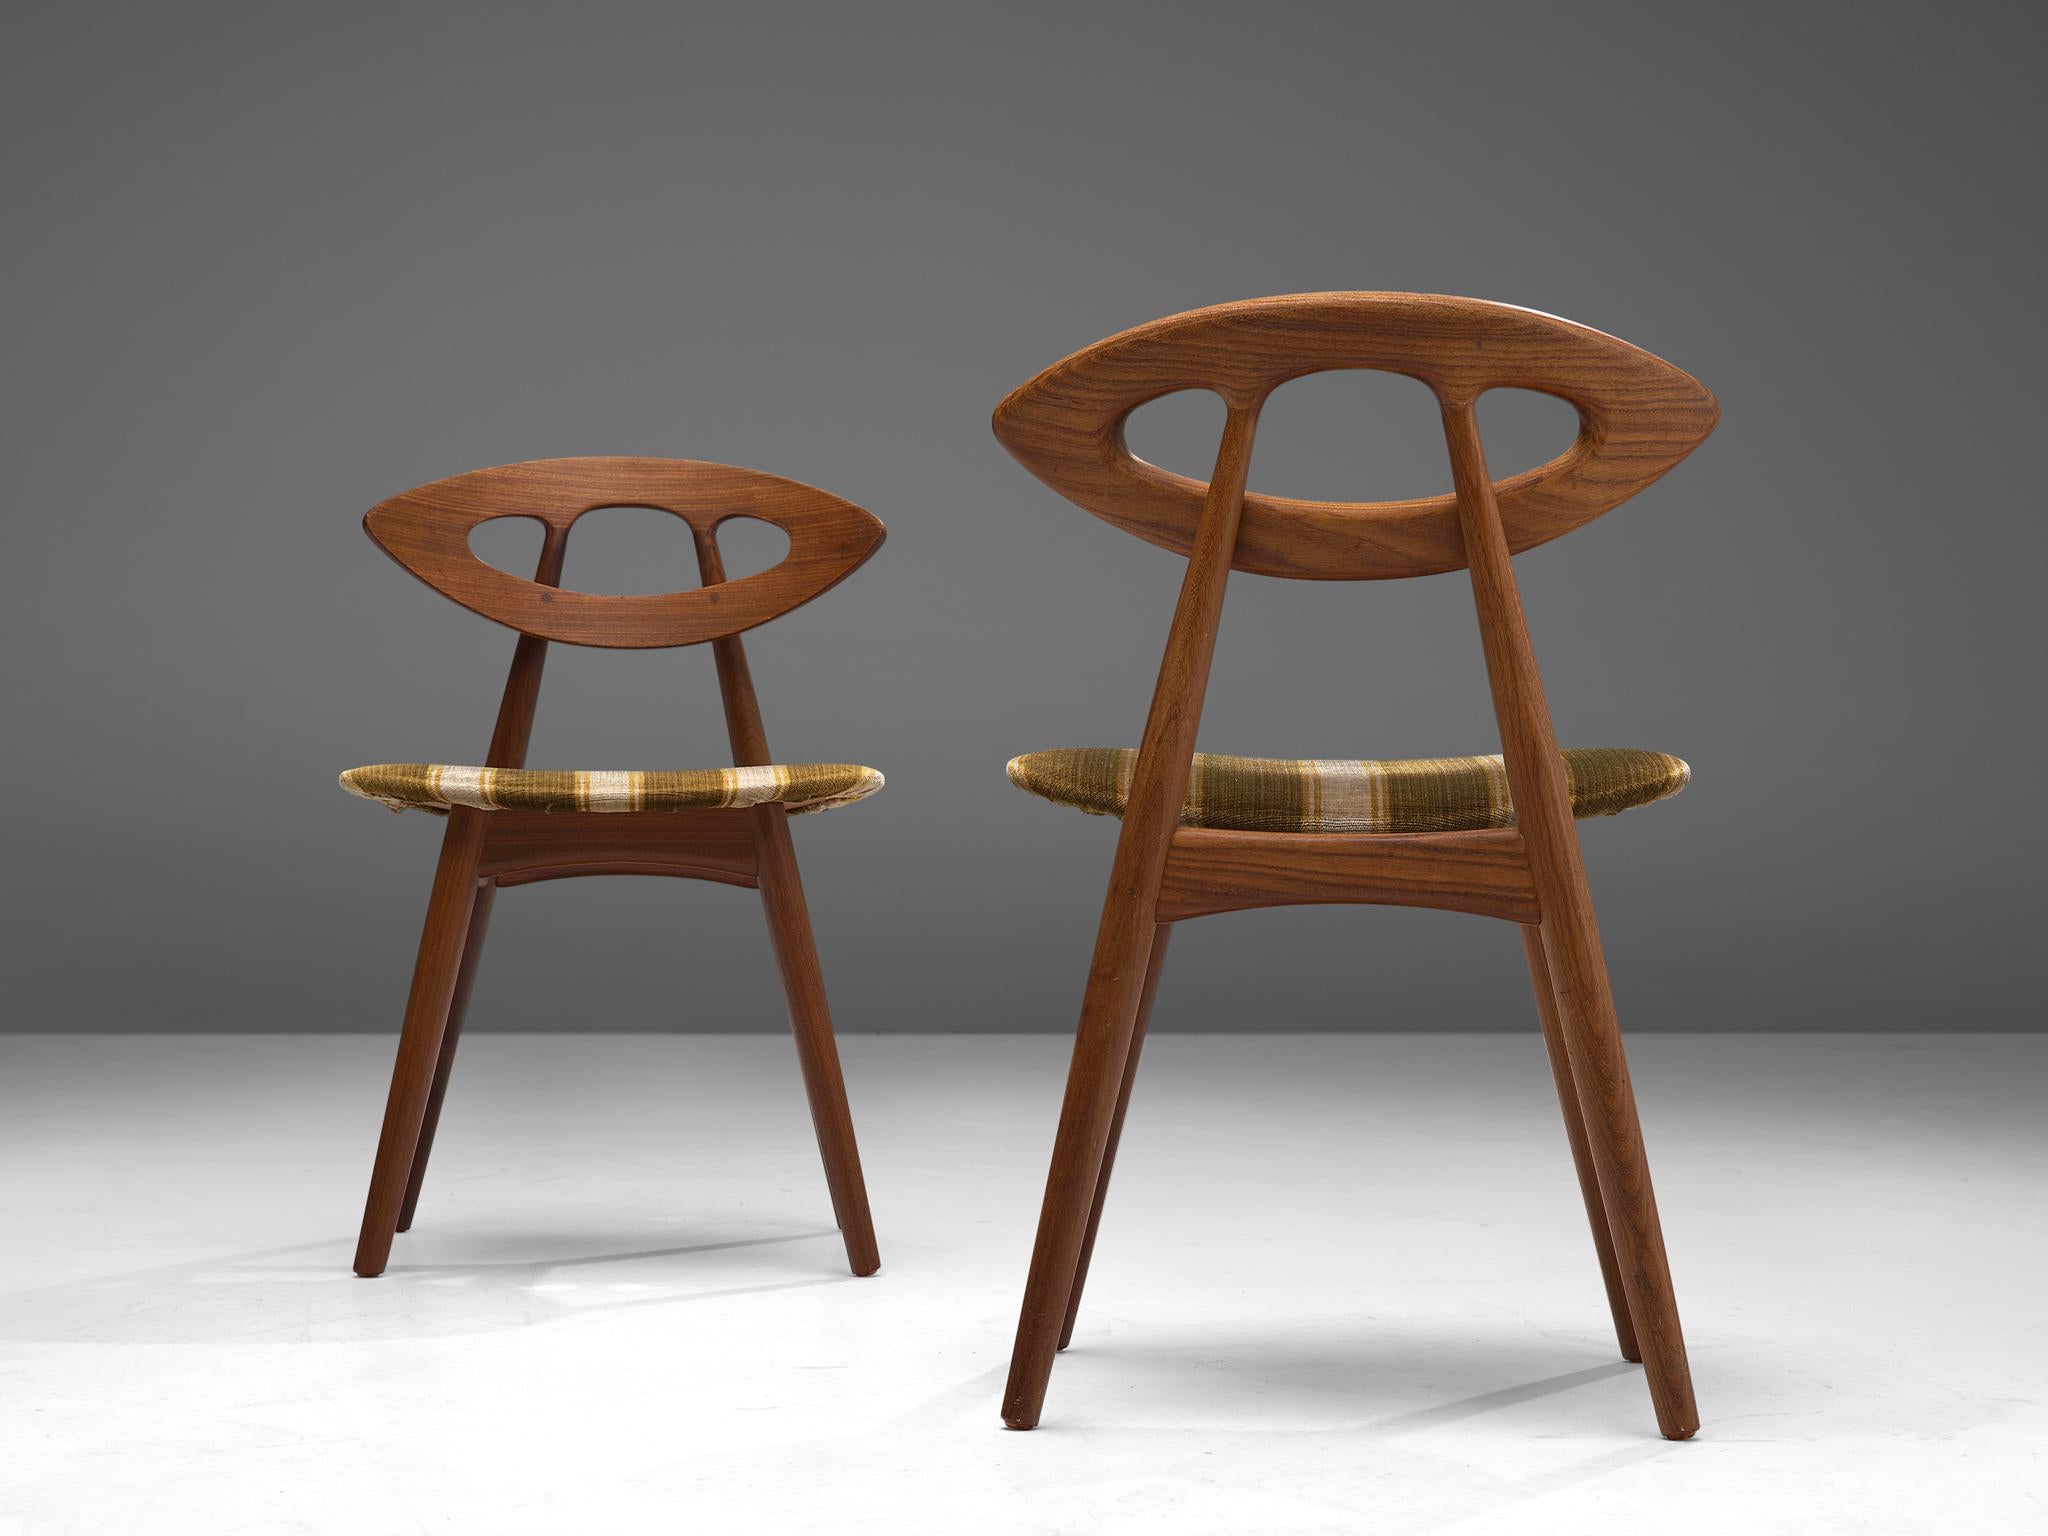 Ejvind A. Johansson for Ivan Gern Møbelfabrik, set of two dining chairs model 84 'Eye,' teak and fabric, Denmark, design 1961, later production

Wonderful and exclusive set of 'Eye' chairs by Danish designer Ejvind Johansson. Characteristic is the